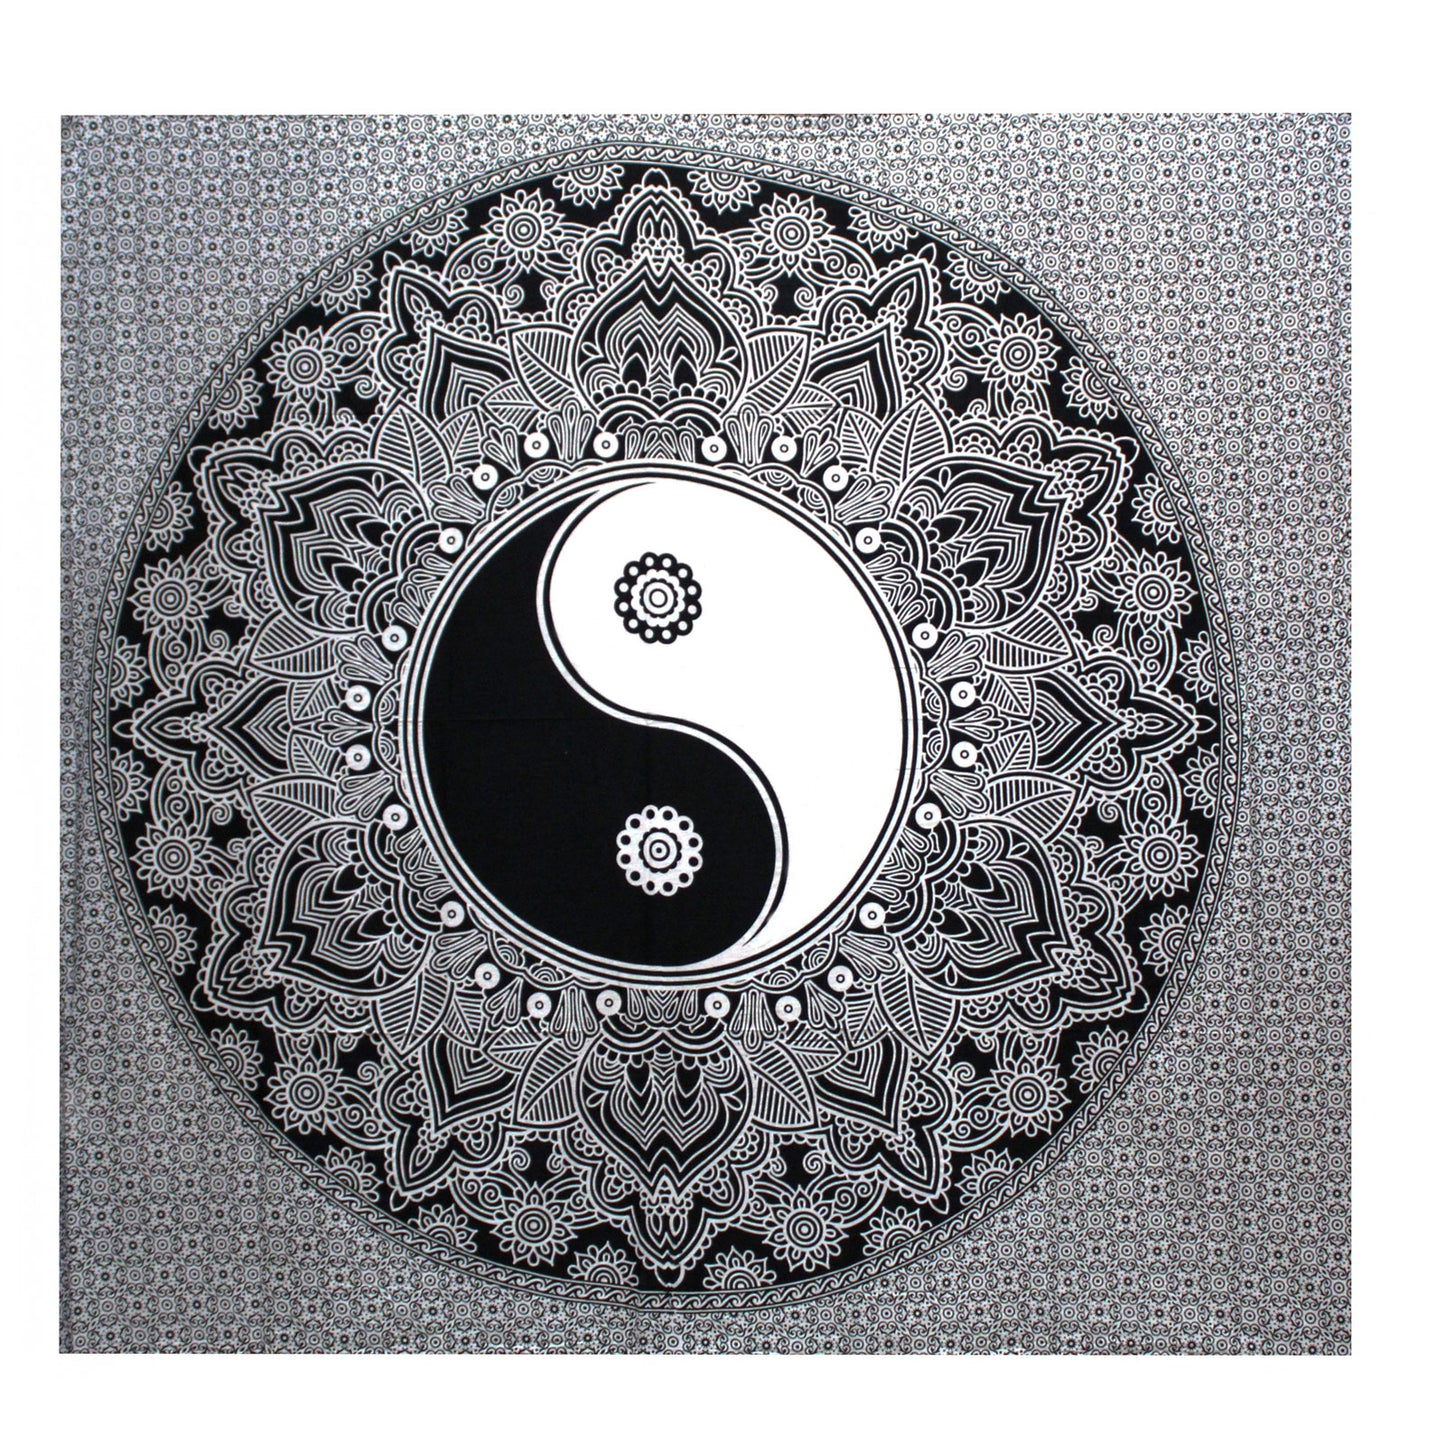 Cotton B&W Bedspread and/or Wall Hanging - Ying Yang (Double)